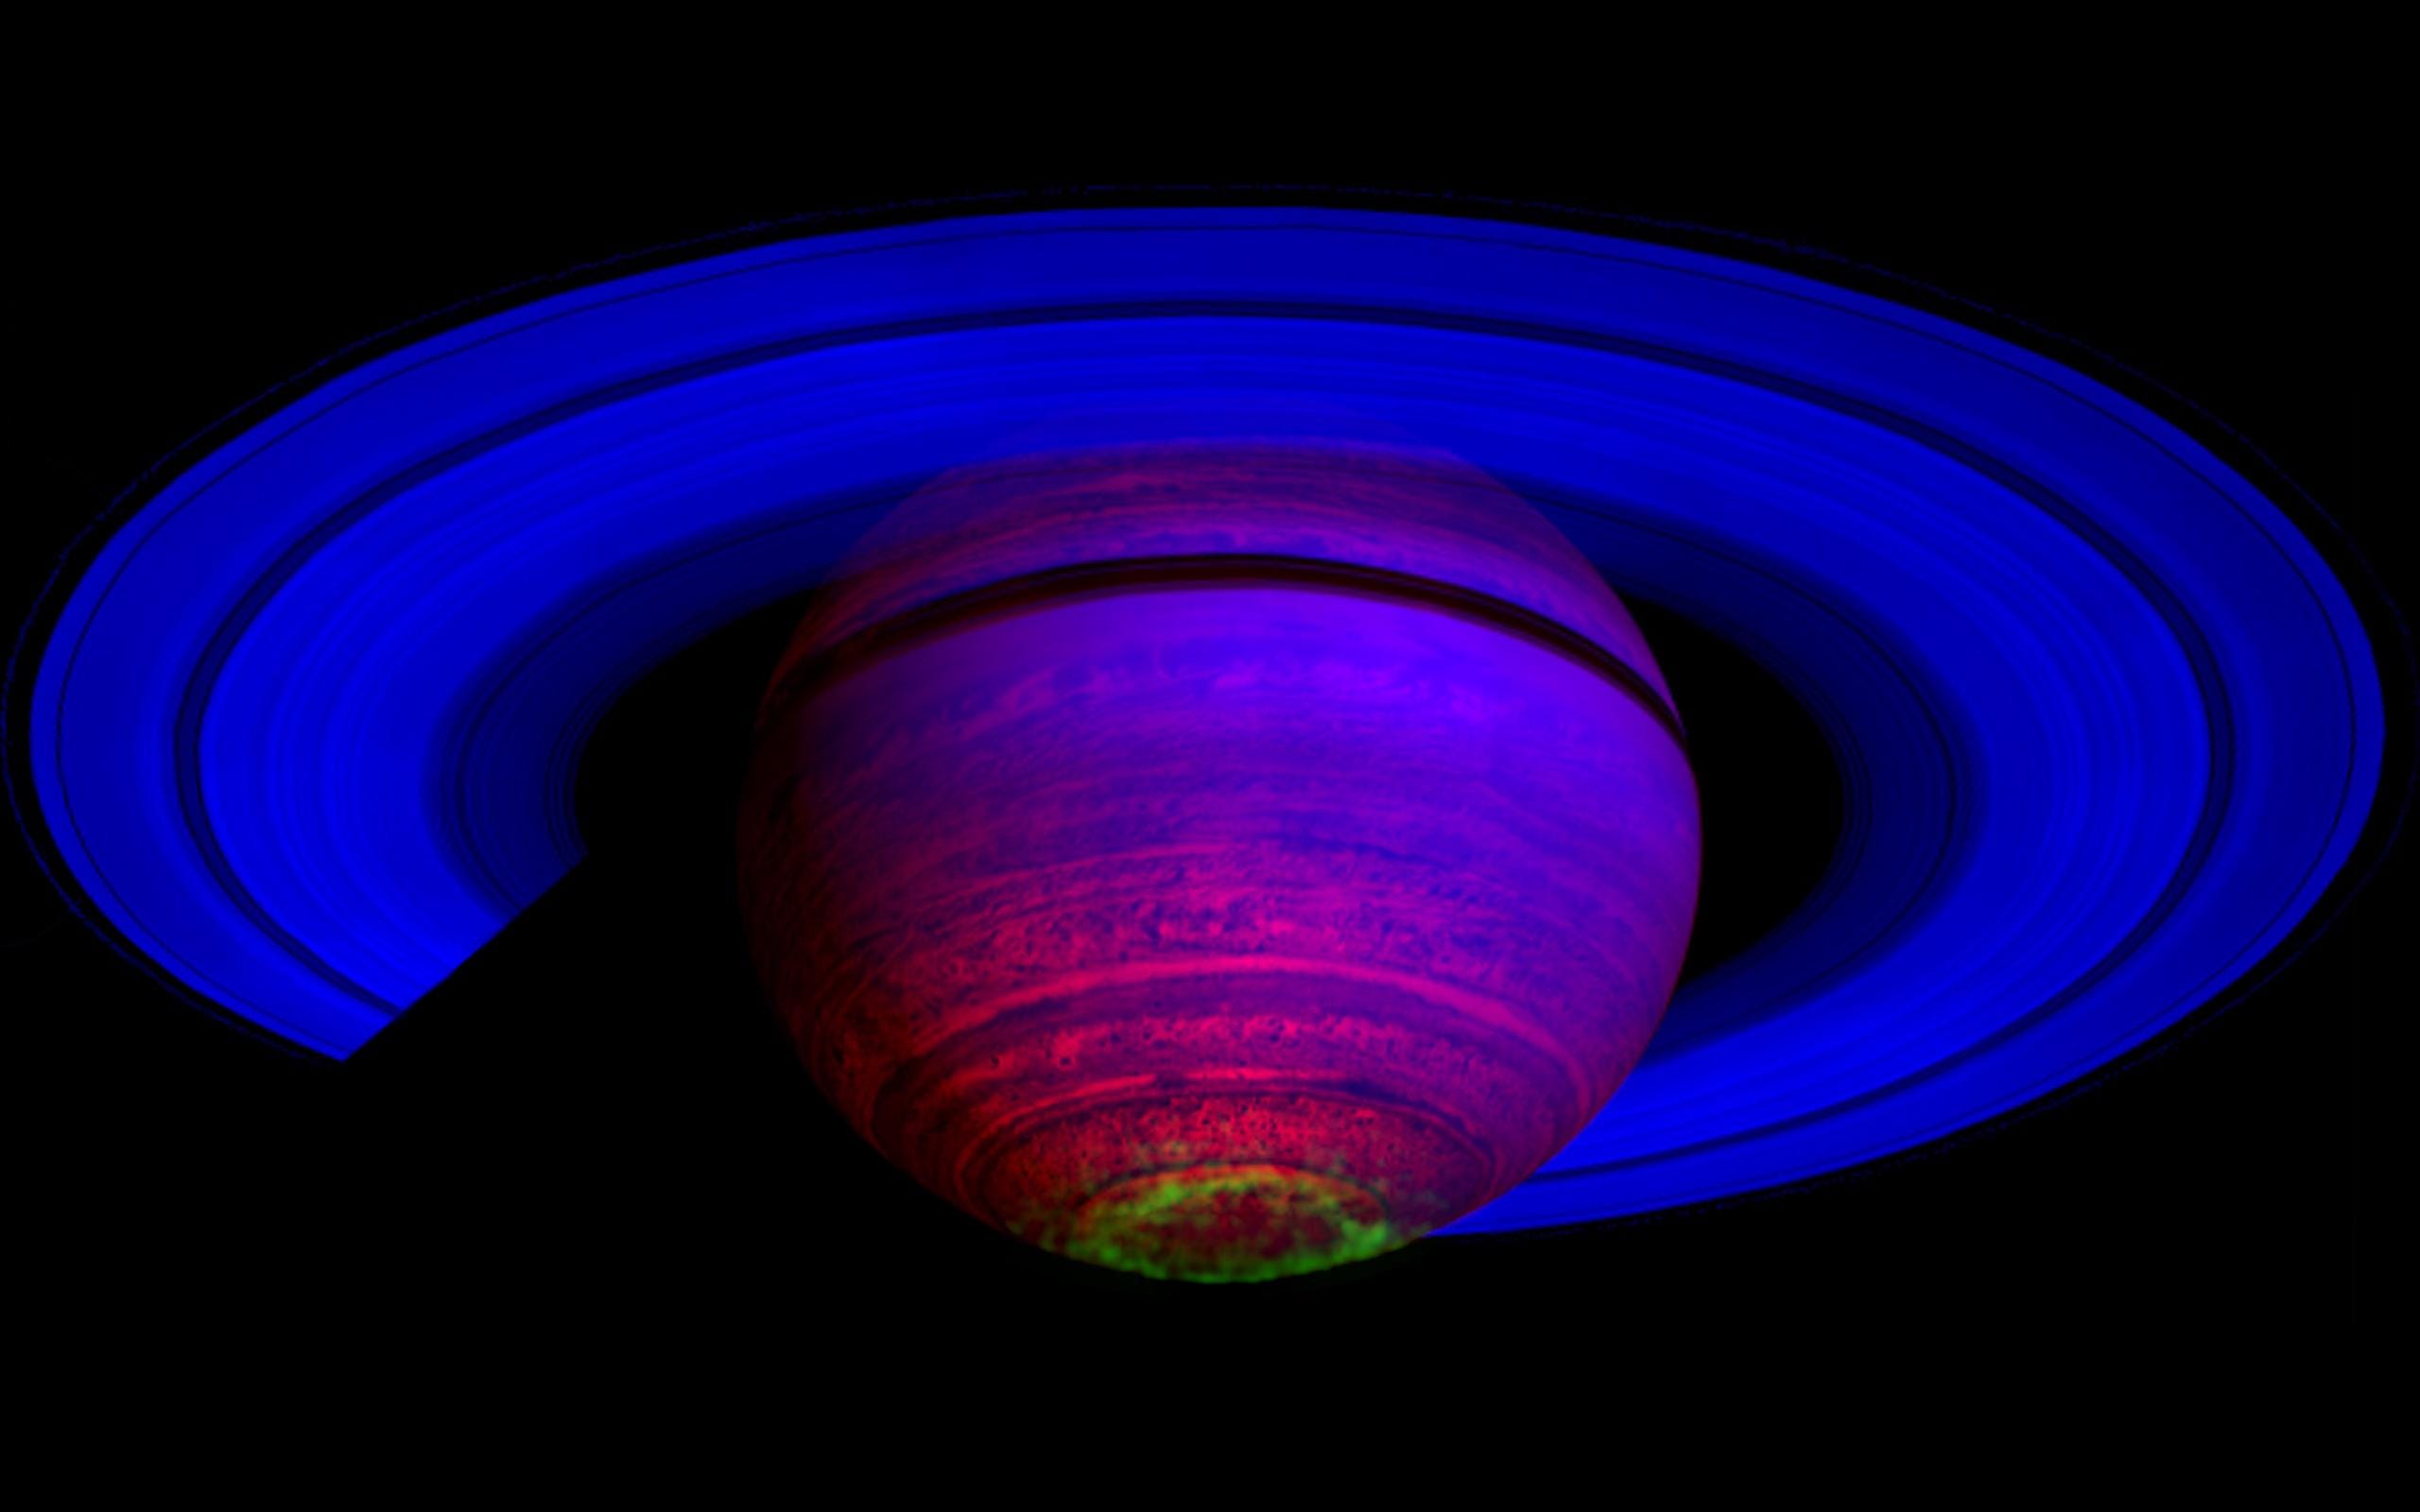 saturn in false color purple blue rings with green aurora circling south pole